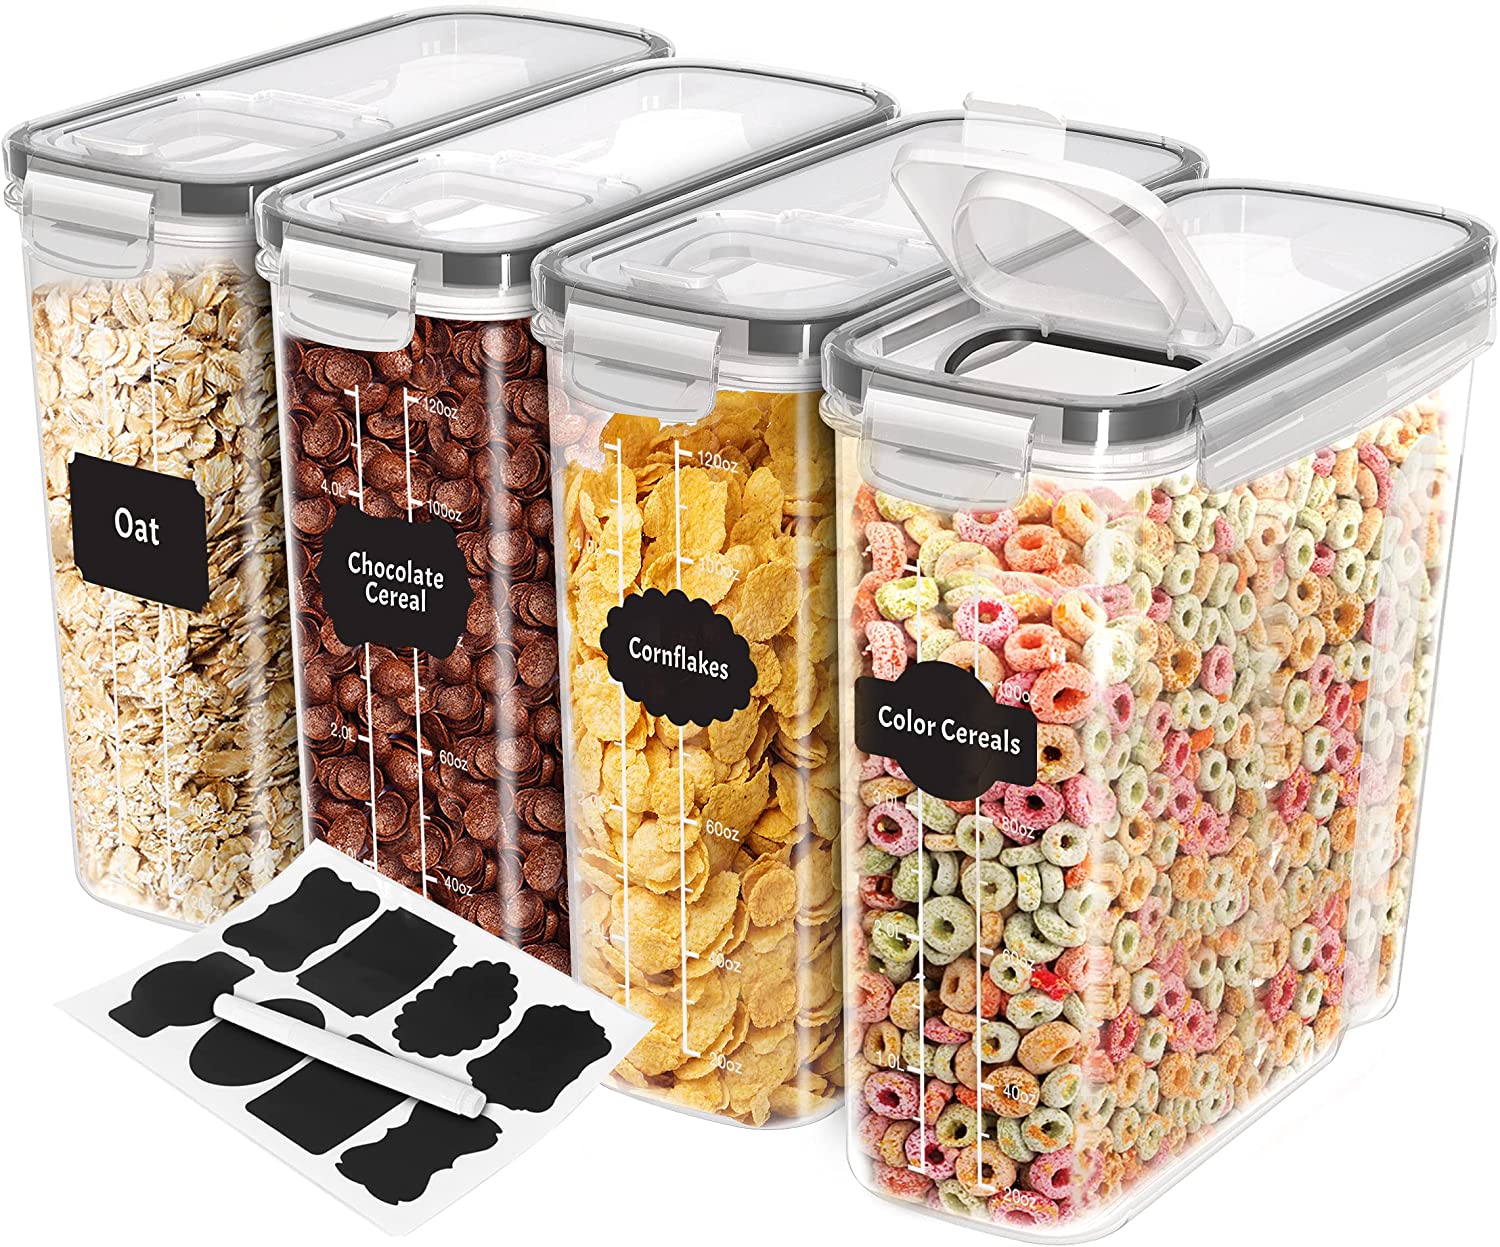 LANGMINGDE 1 Piece Cereal Containers Storage, 2.8L/95oz Airtight Large Dry  Food Storage Containers with Pouring Spout Measuring Cup for Snacks Grain